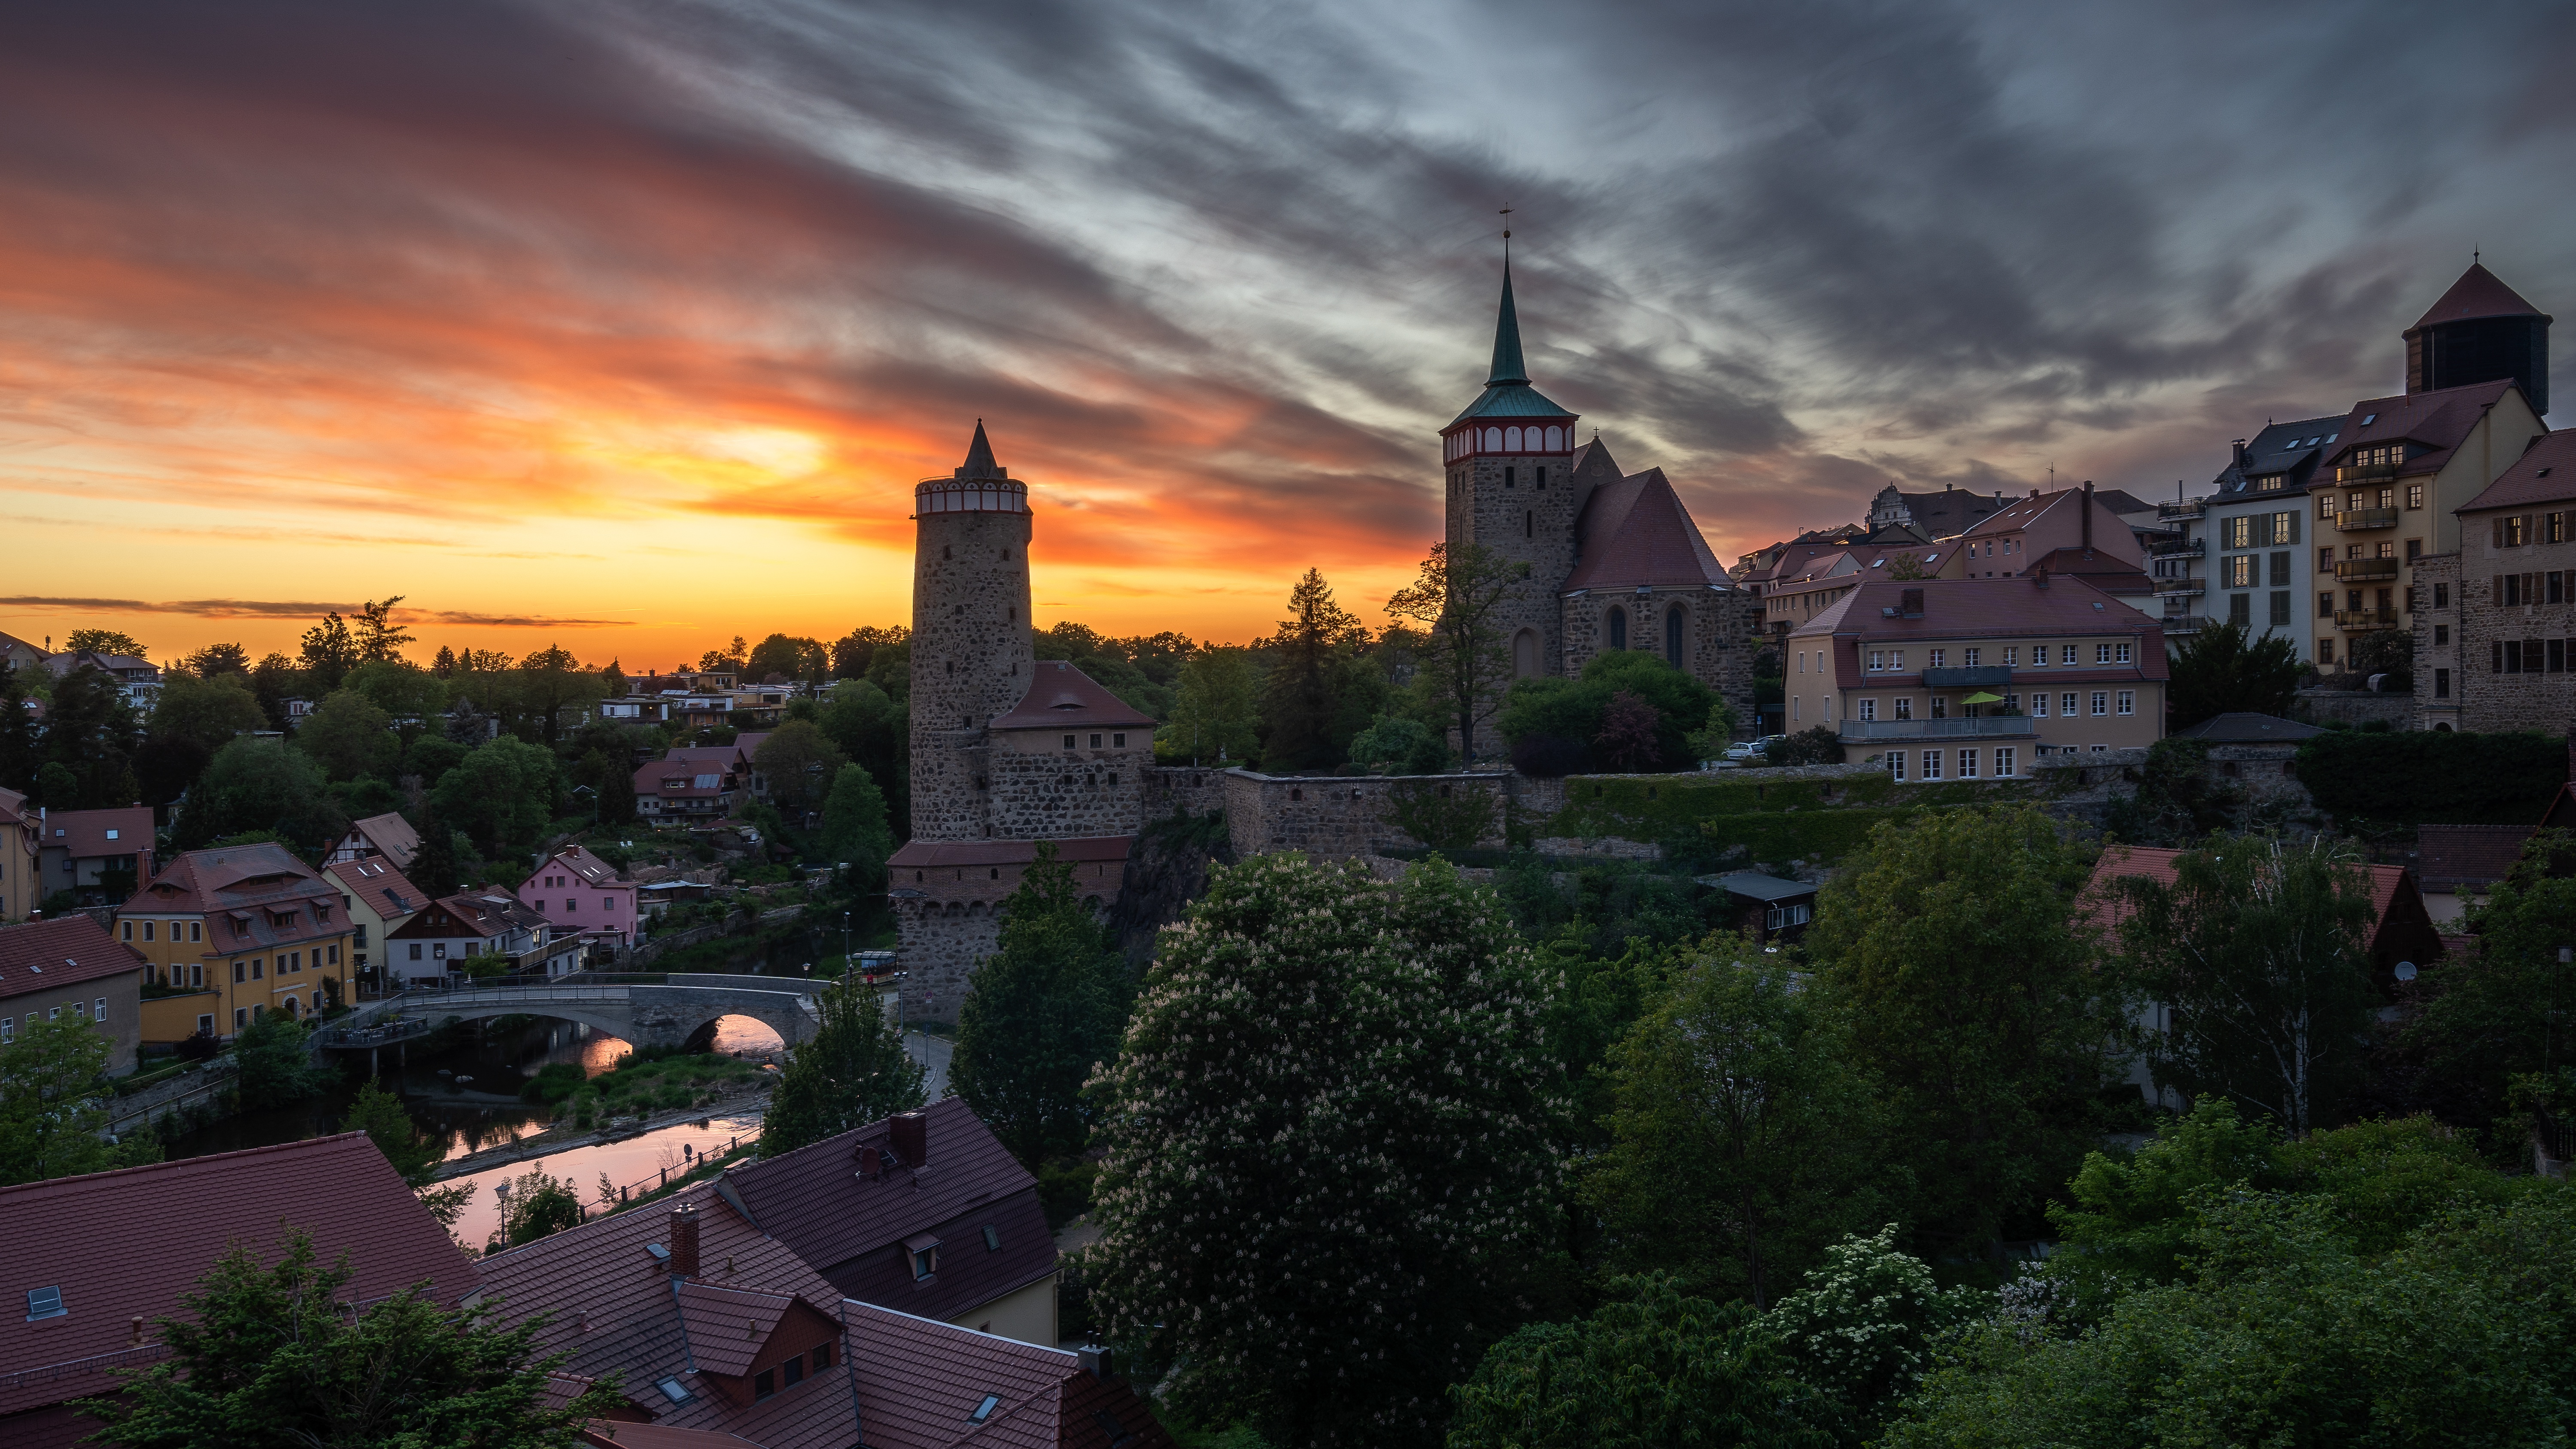 man made, town, city, evening, fortress, germany, house, river, tower, towns